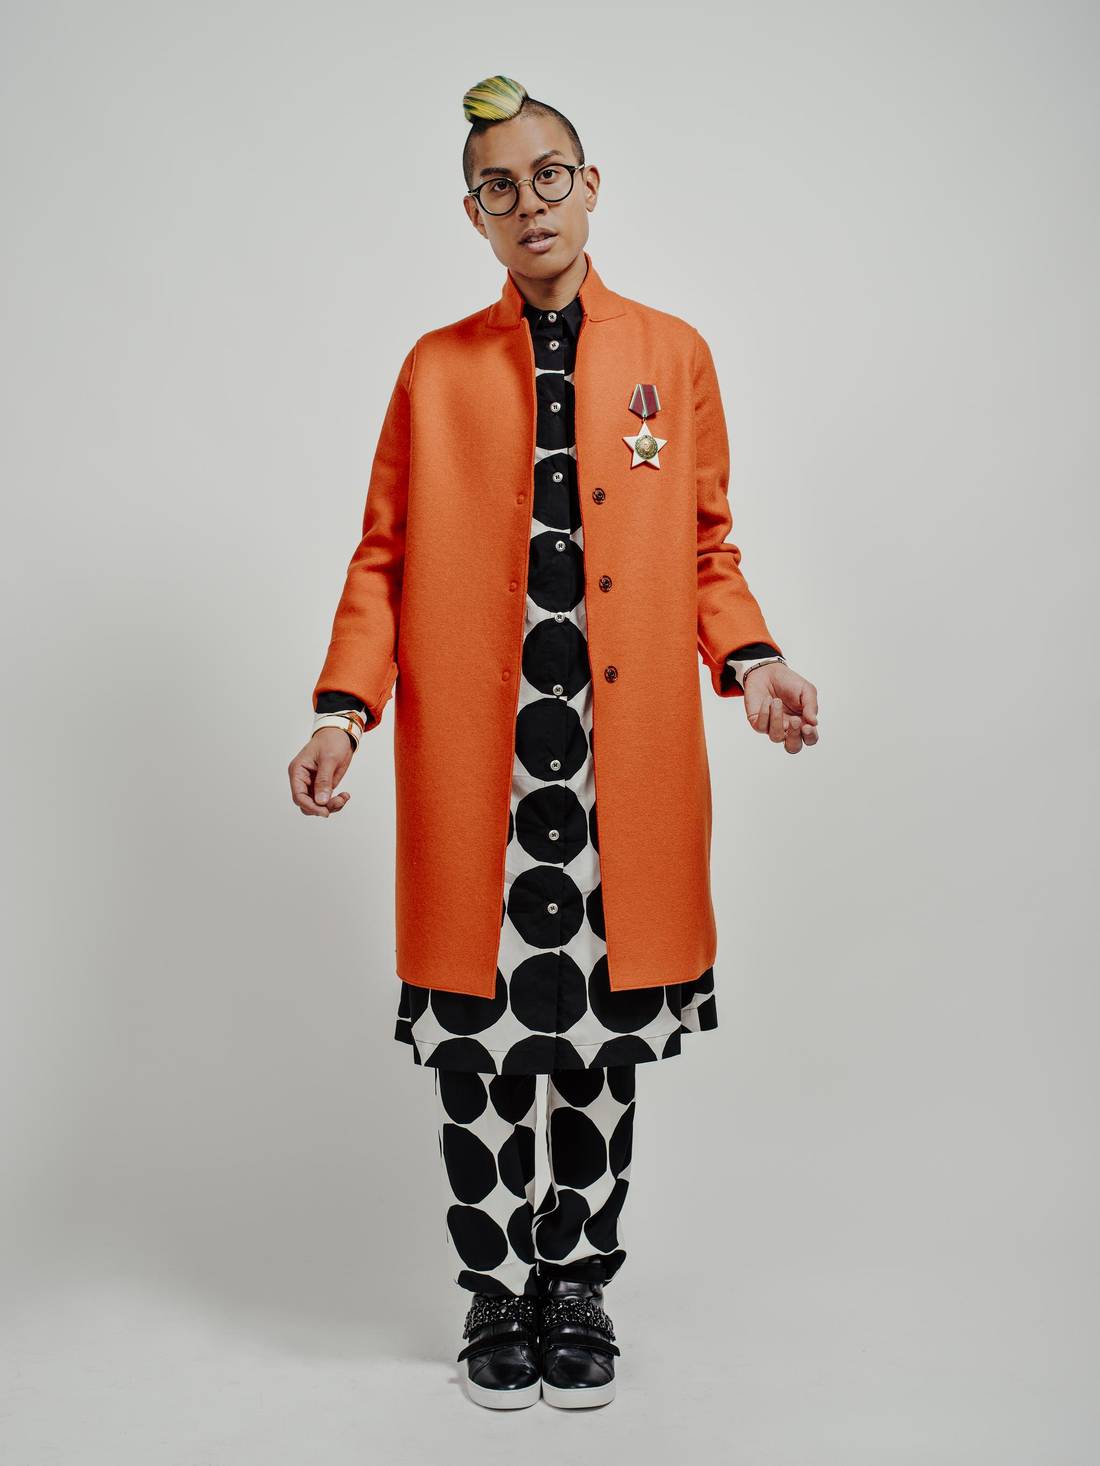 Kassam wears a coat by Harris Wharf of London over a shirt and trousers by Marimekko. His eyeglasses are Céline, his sneakers are Michael Kors, and his Bulgarian medal is a vintage heirloom.